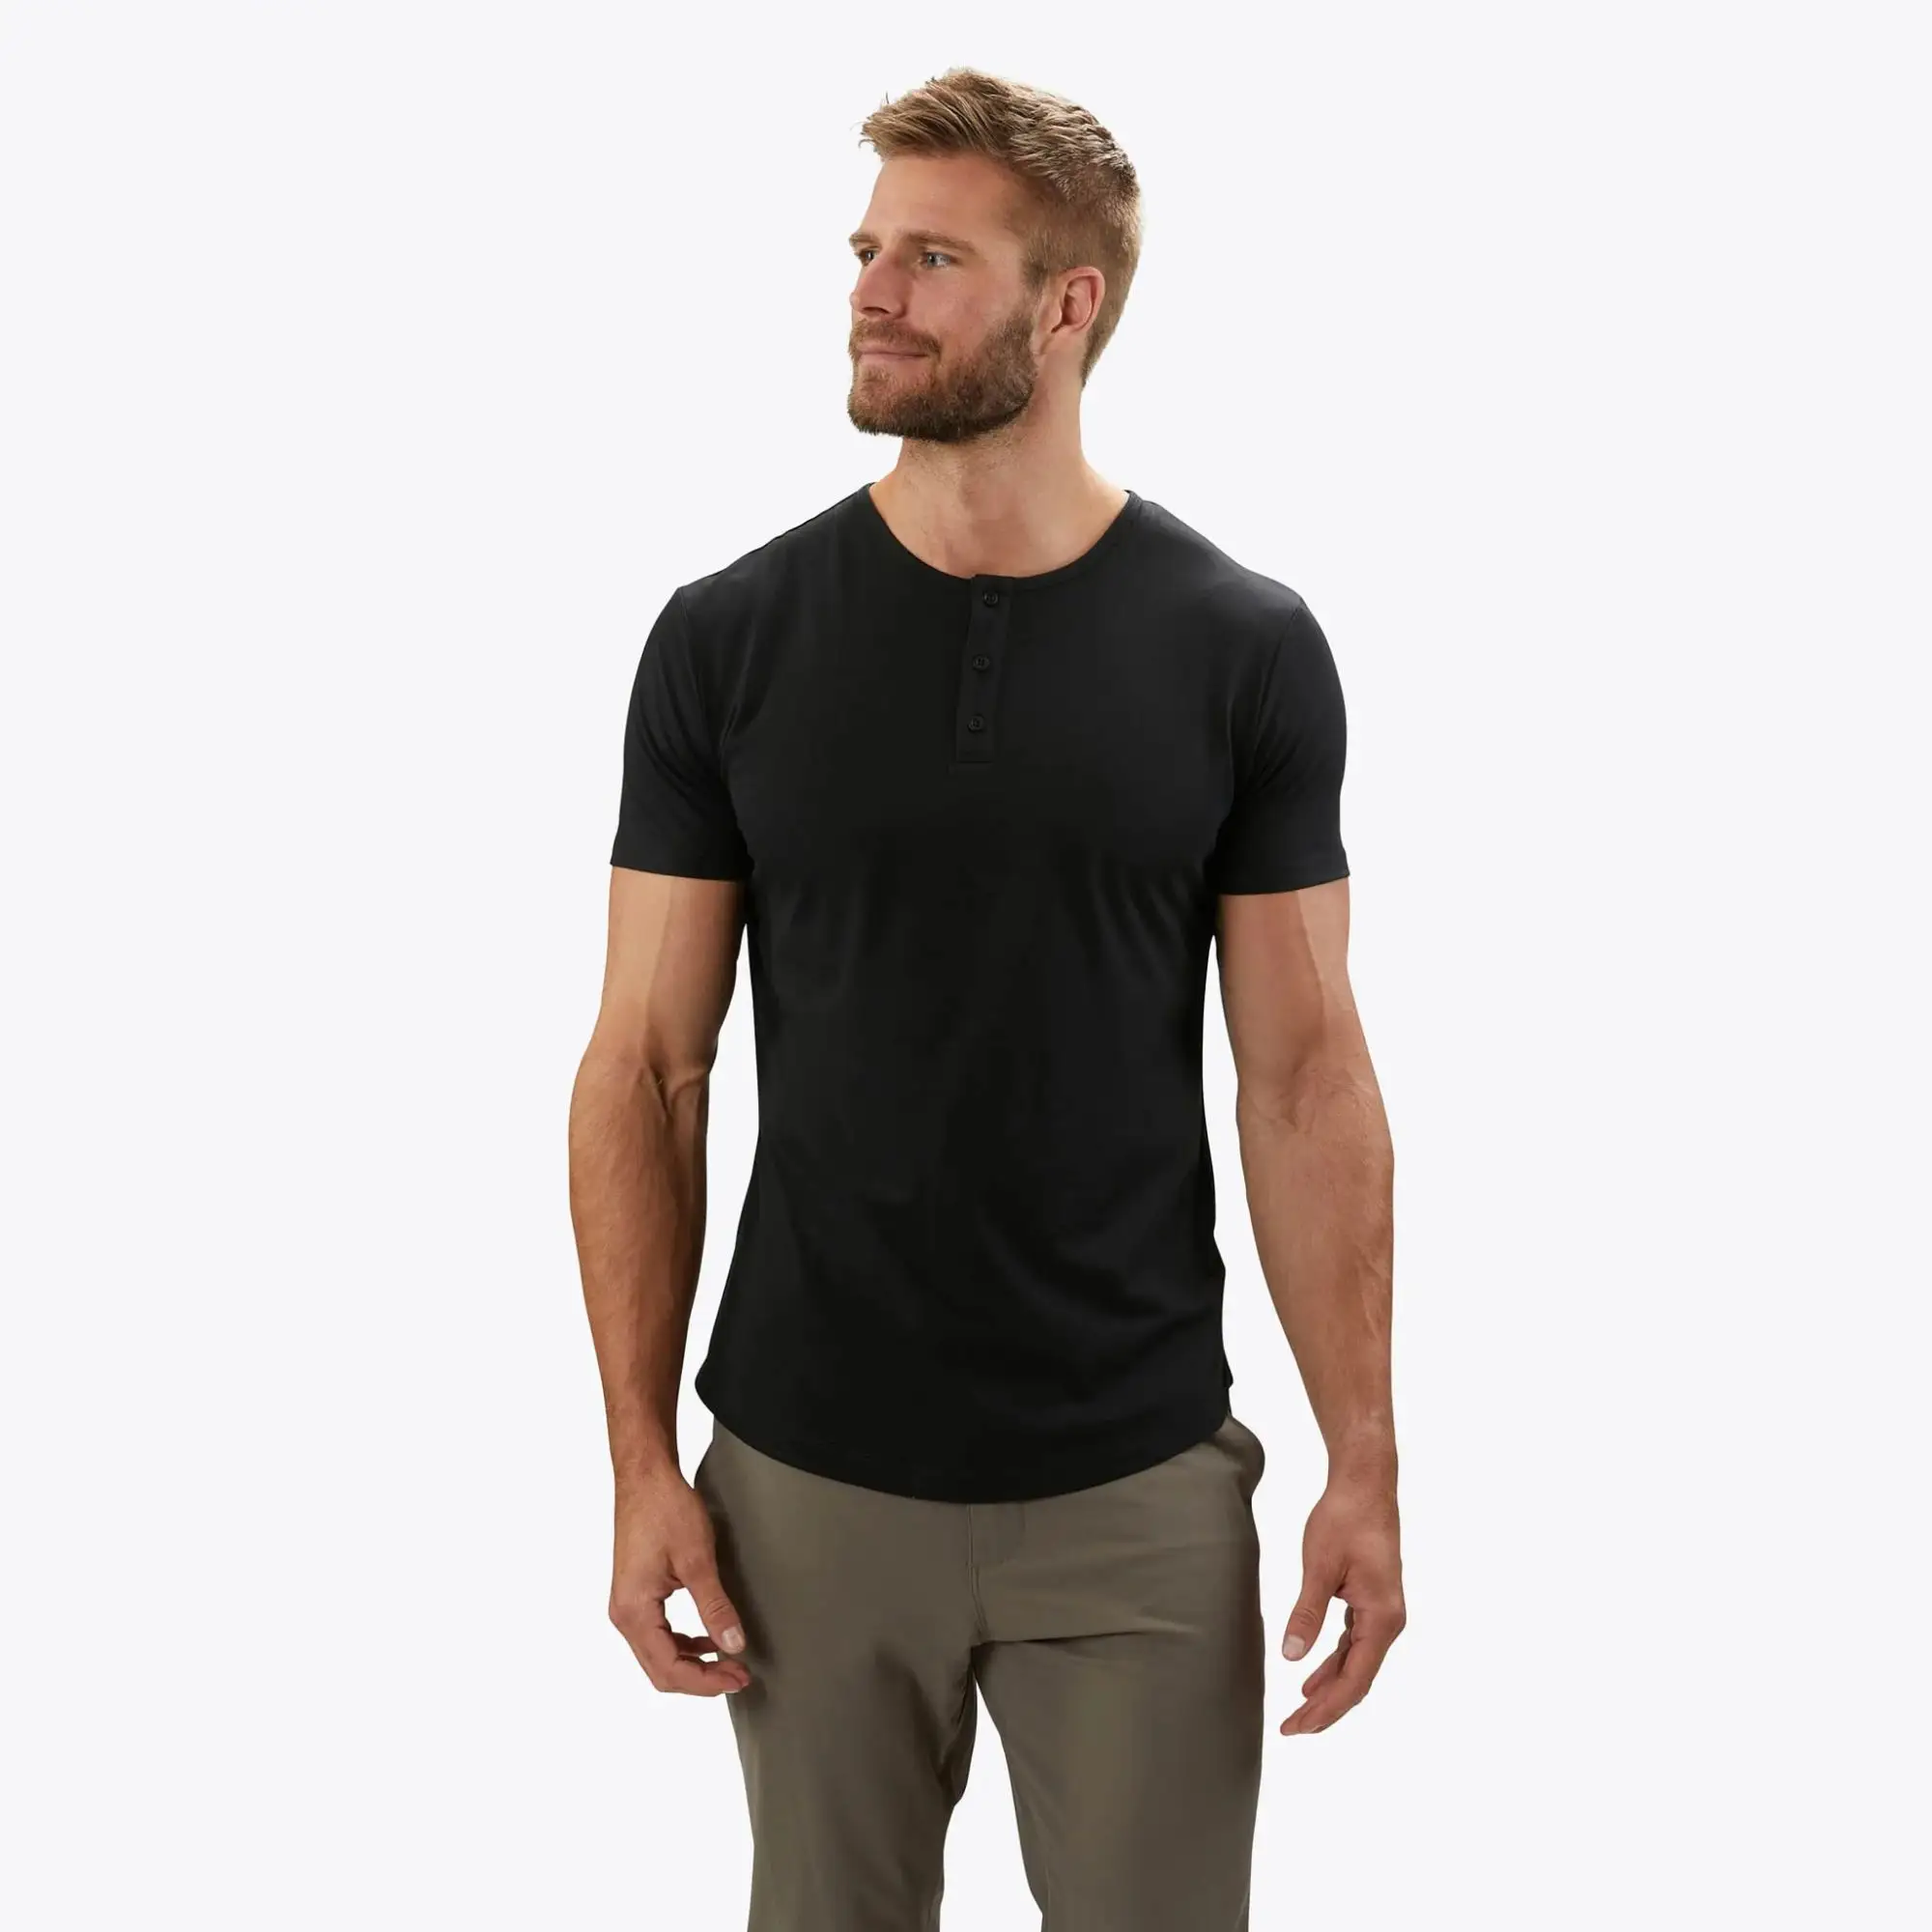 Top Selling Buttery Soft 62% Polyester 33% Cotton 5% Spandex Signature Fit Henley Curve-Hem Black Shirt